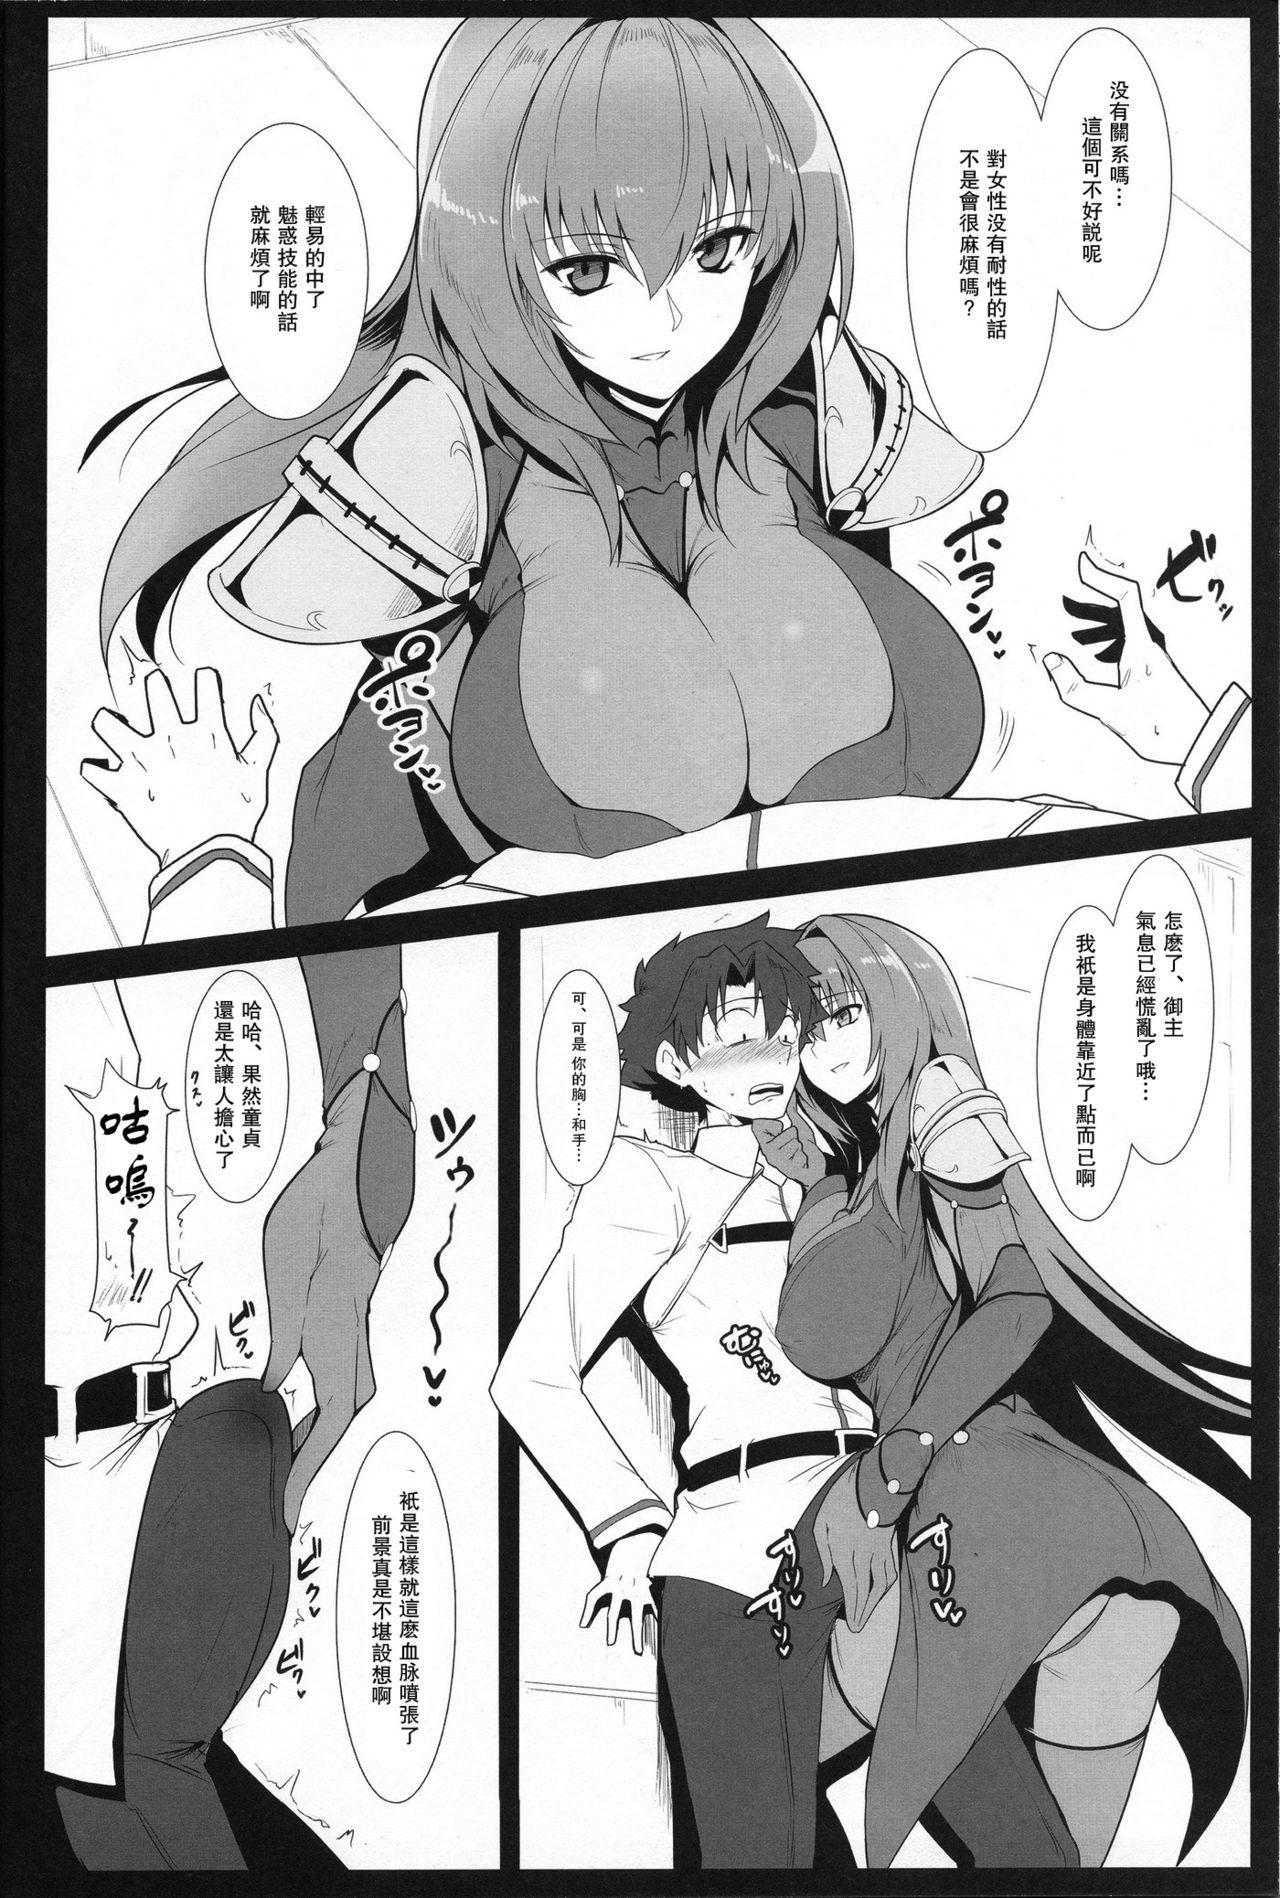 Ass Licking AH! MY MISTRESS! - Fate grand order Hardcore Fucking - Page 5